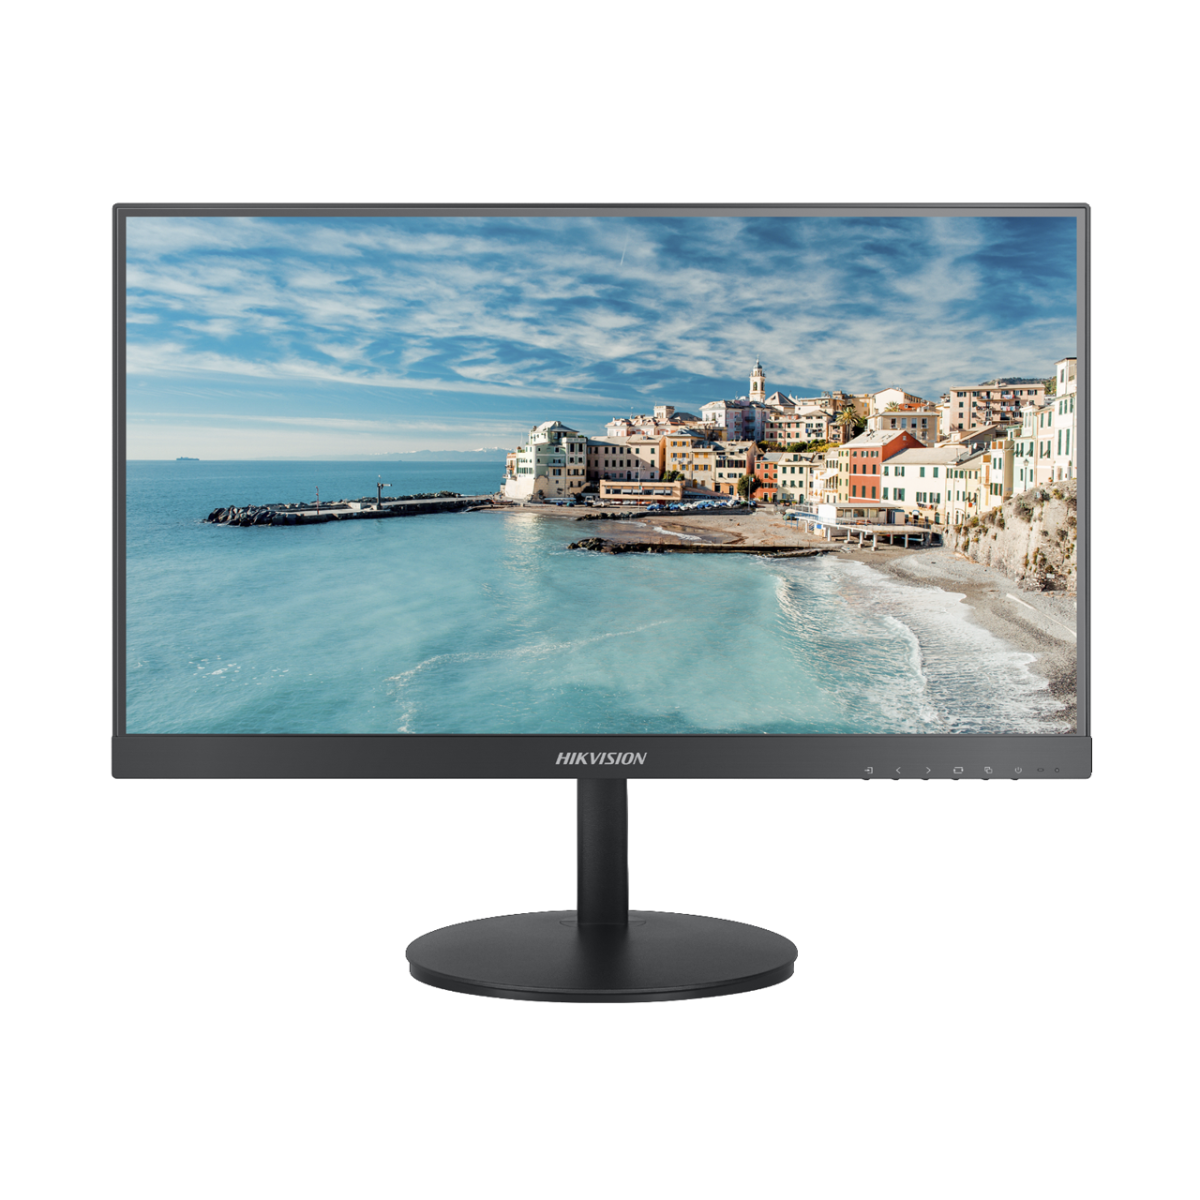 DS-D5022FN-C - Monitor 22 inch 24/7 voor live view